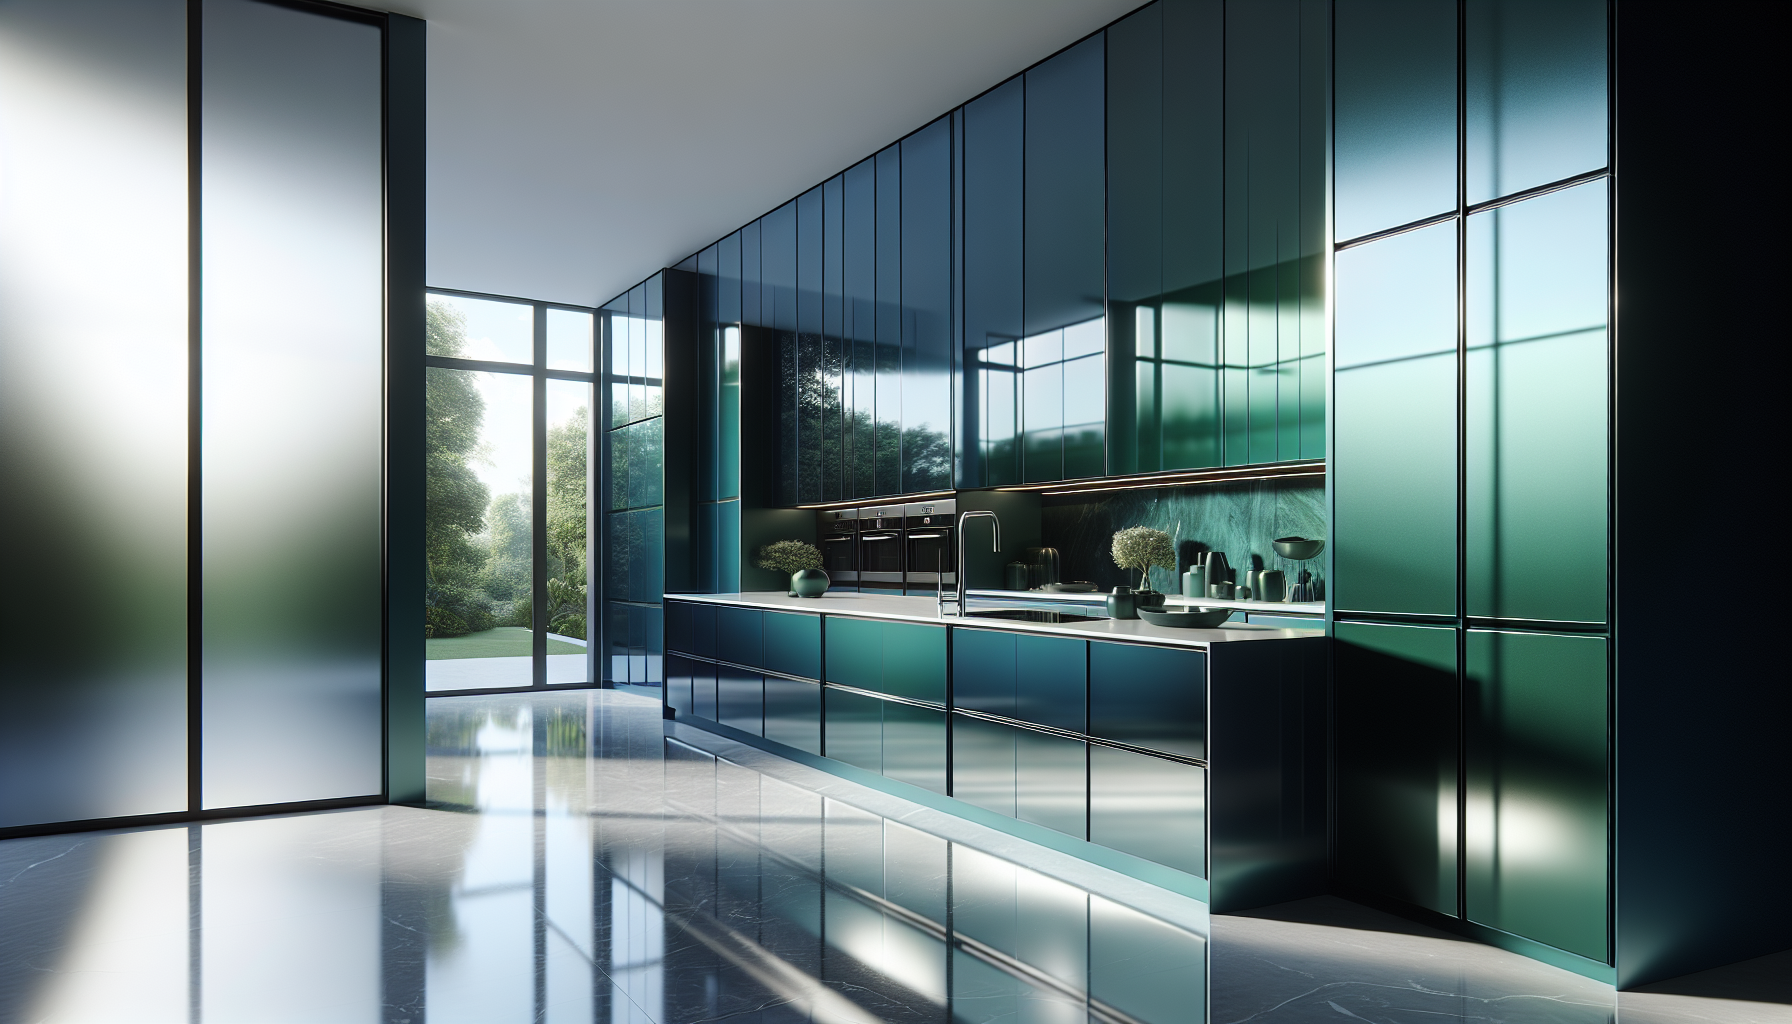 Sleek and sophisticated cabinetry in luxury modern kitchen design